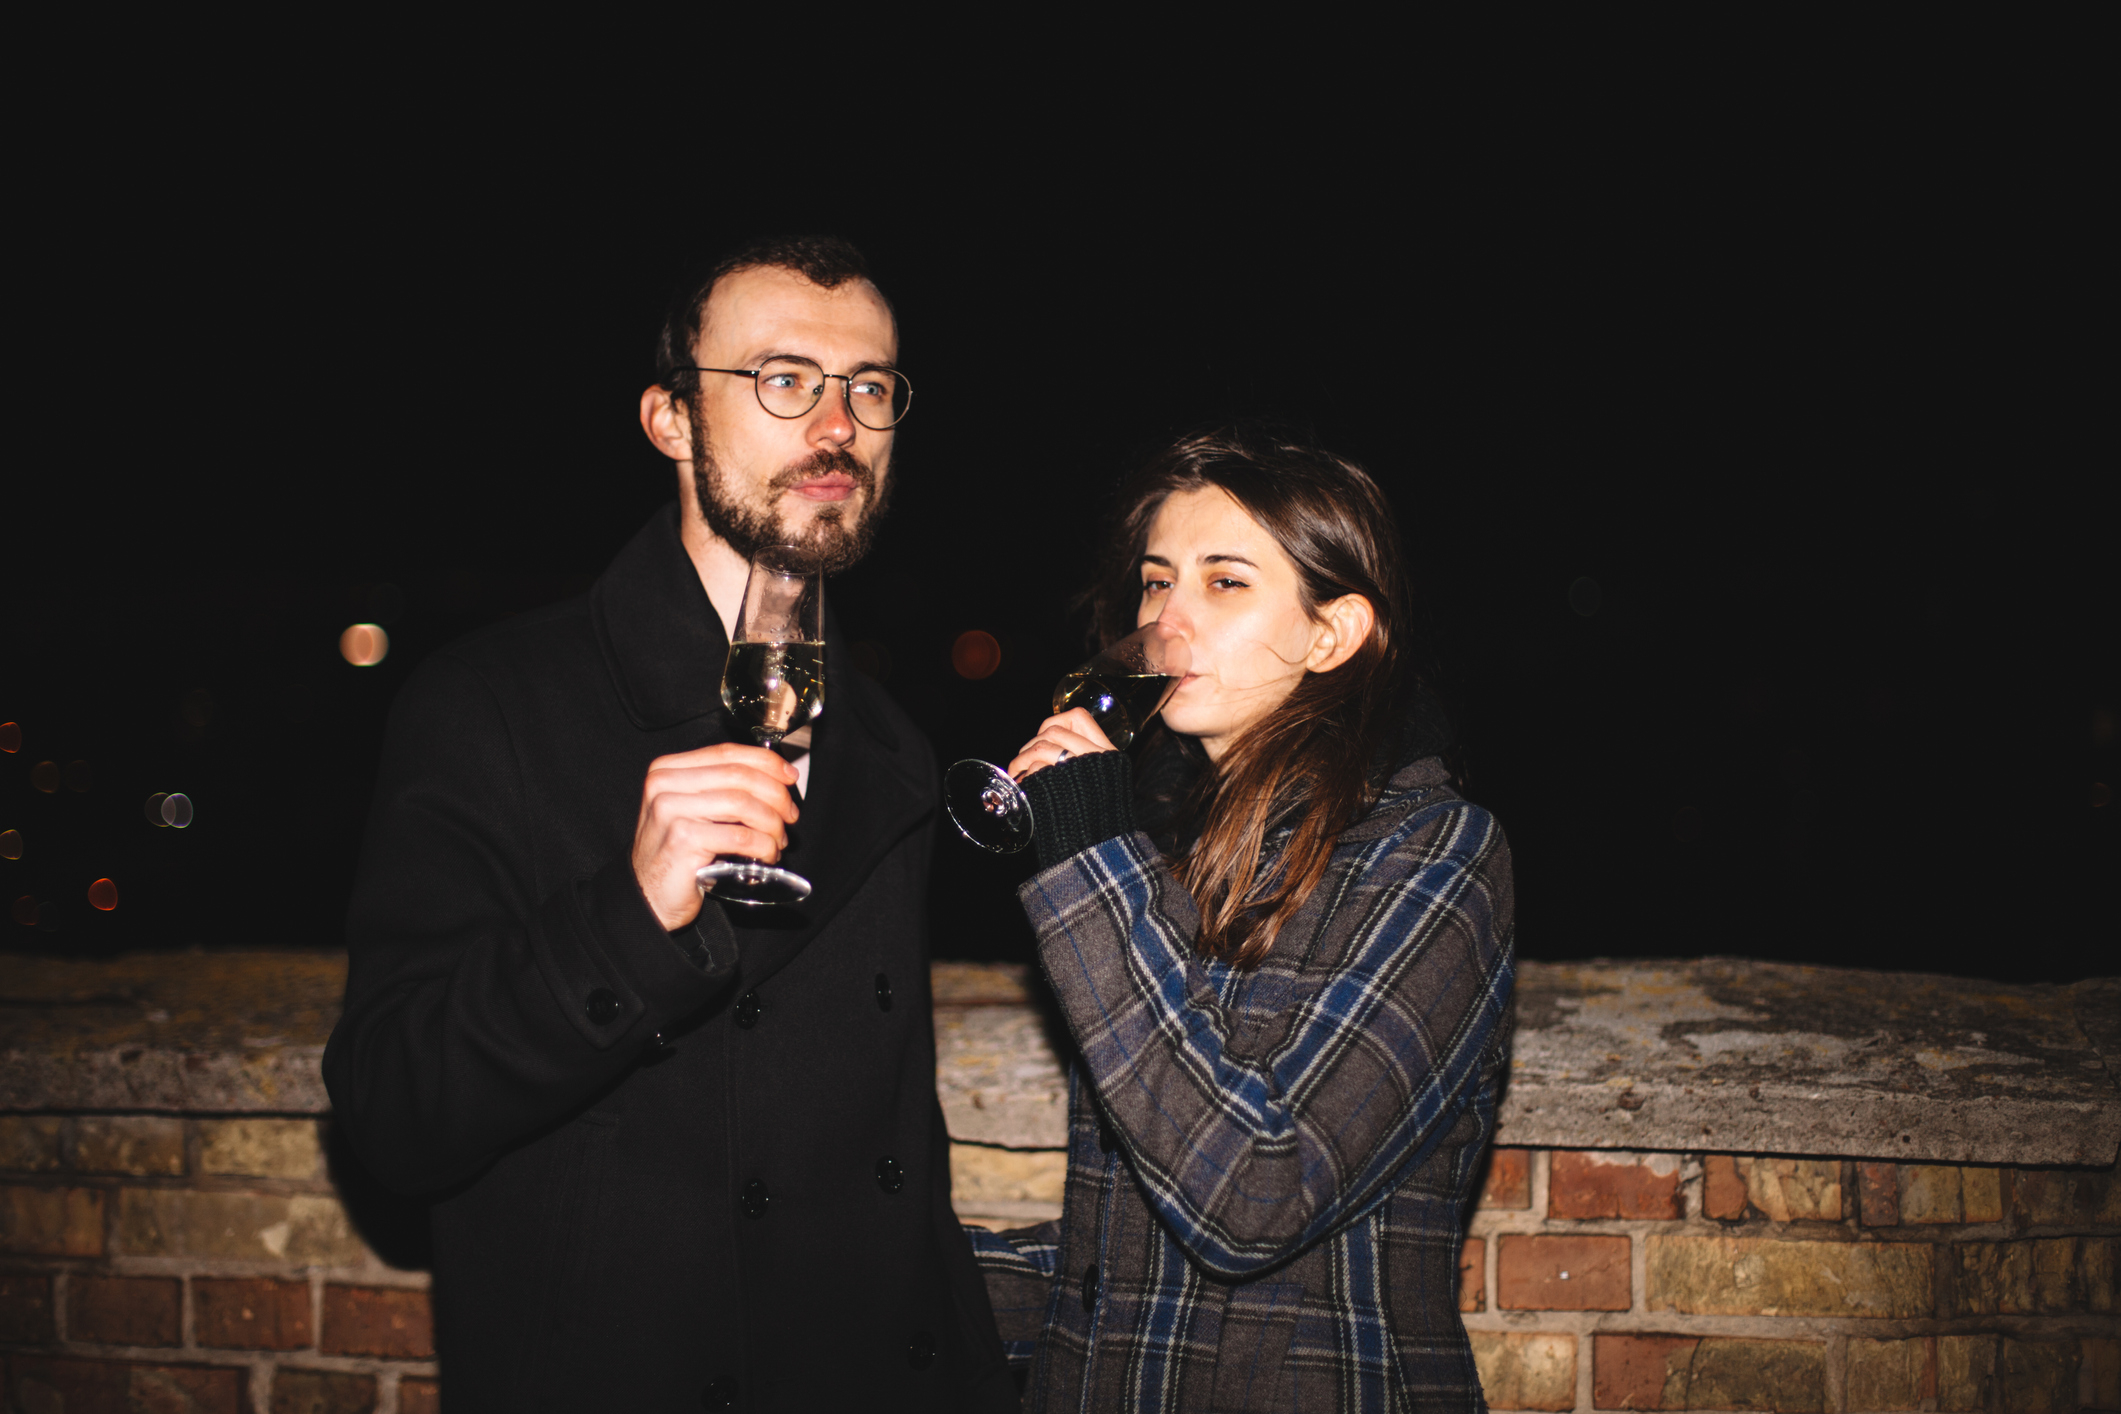 Two people standing close, holding and sipping from wine glasses at night